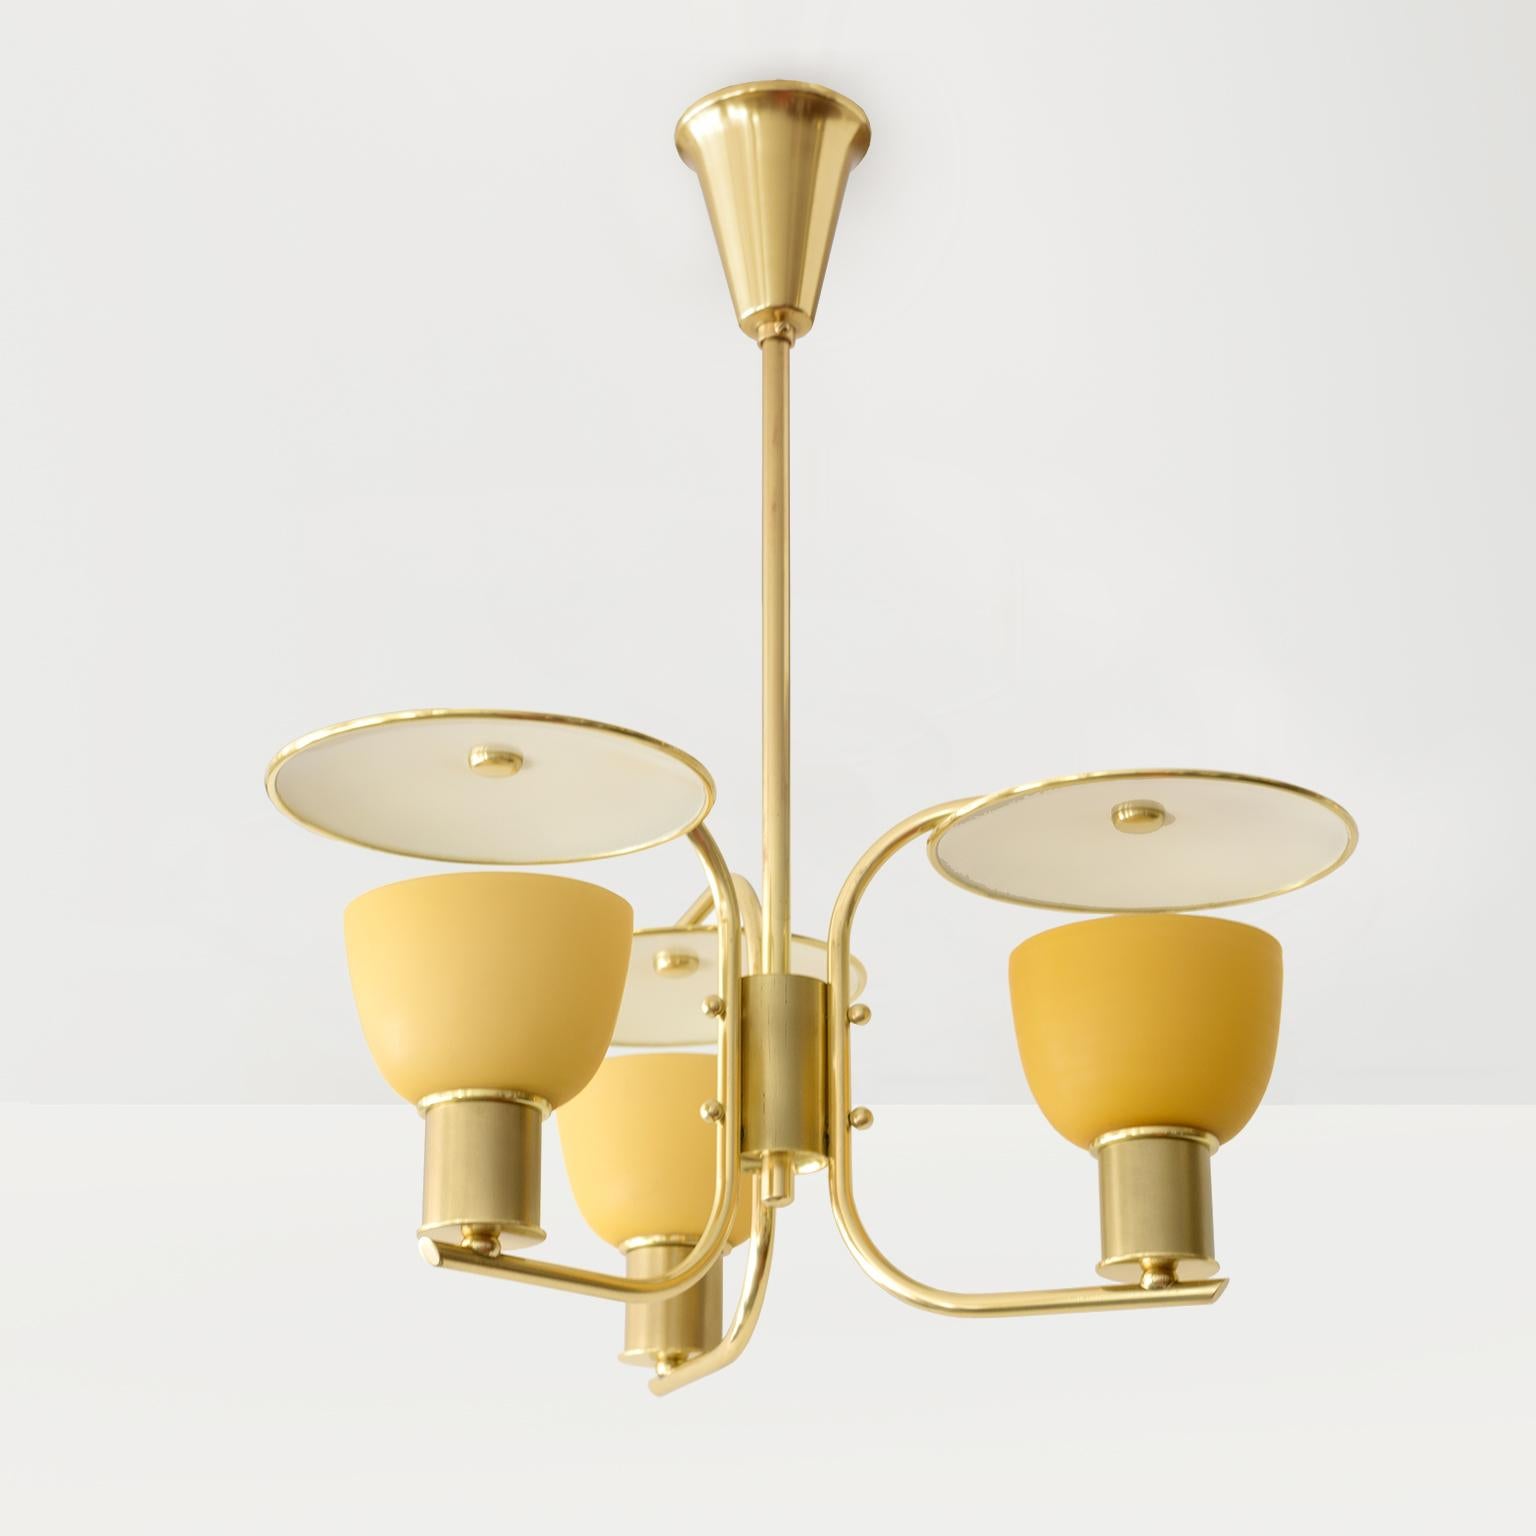 A Danish, 1940’s polished brass 3-arm chandelier with amber glass shades. The brass frame consists of 3 “C” shaped arms each suspends a brass reflector disk which is lacquered on one side. Newly polished and lacquered and required with 3 standard